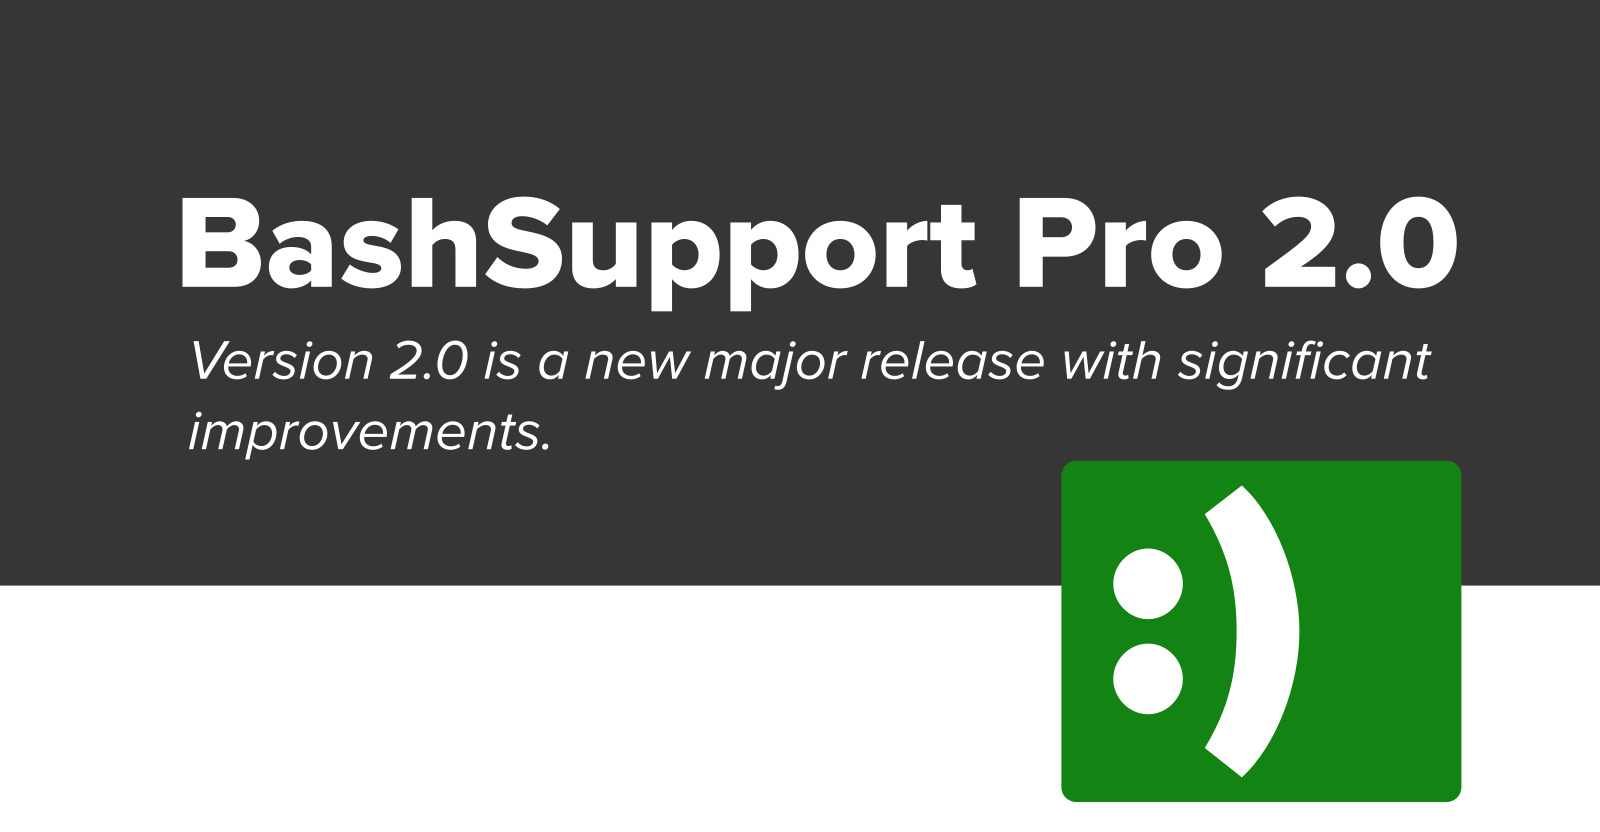 BashSupport Pro Version 2.0 has been released today. It is a new major version, adding important new functionality and improving almost every existing